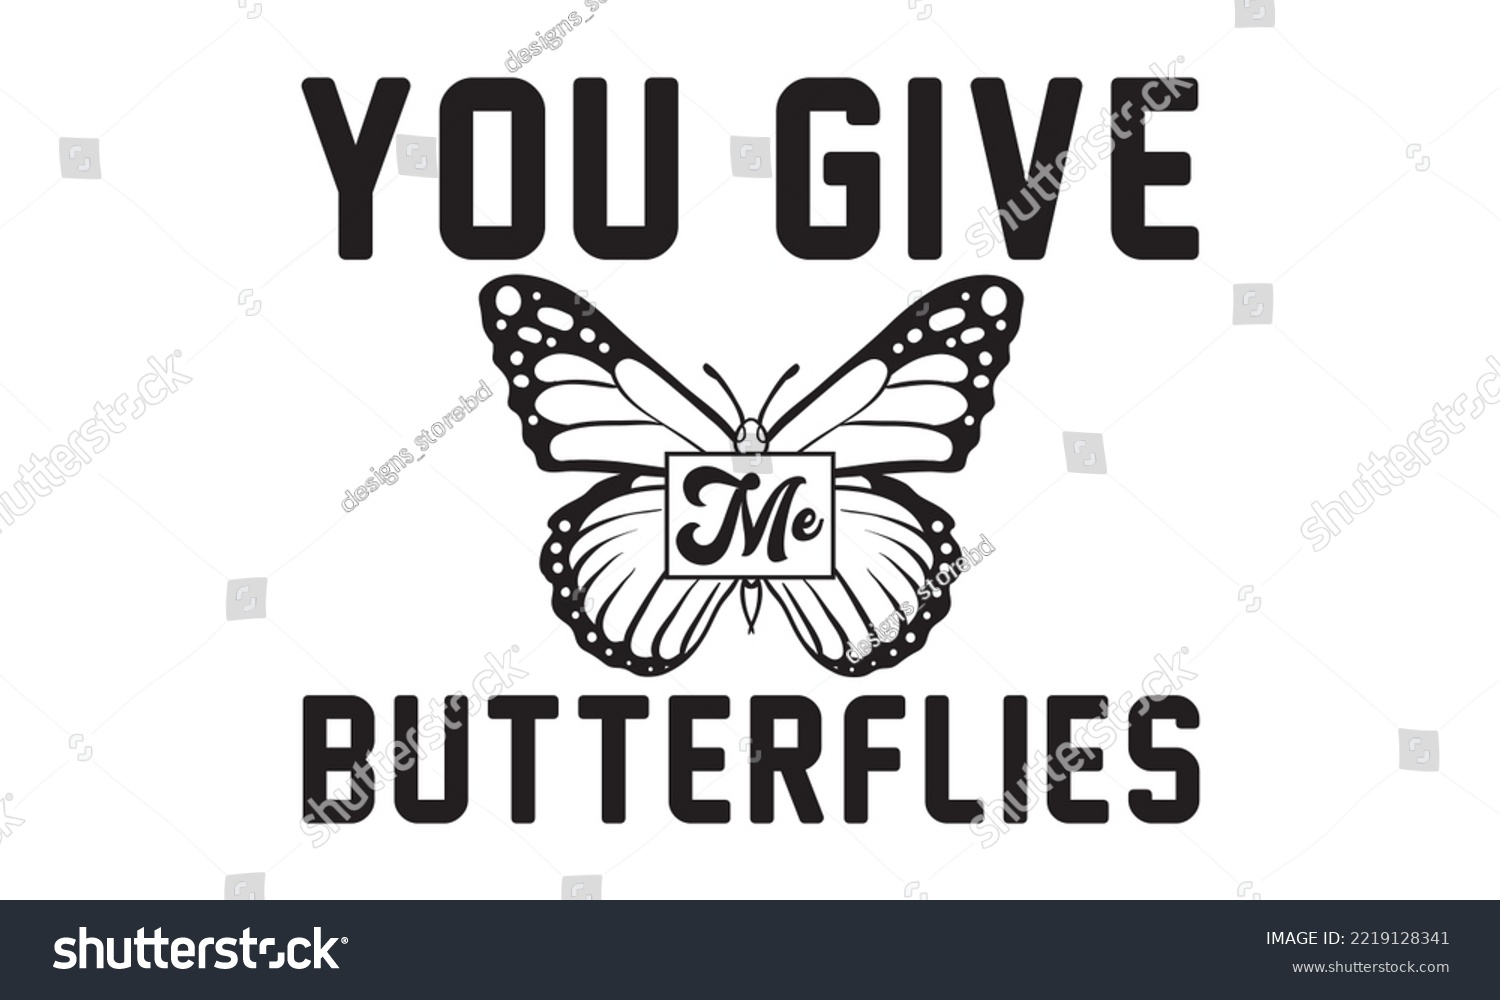 SVG of You Give Me Butterflies Svg, Butterfly svg, Butterfly svg t-shirt design, butterflies and daisies positive quote flower watercolor margarita mariposa stationery, mug, t shirt, svg, eps 10 svg